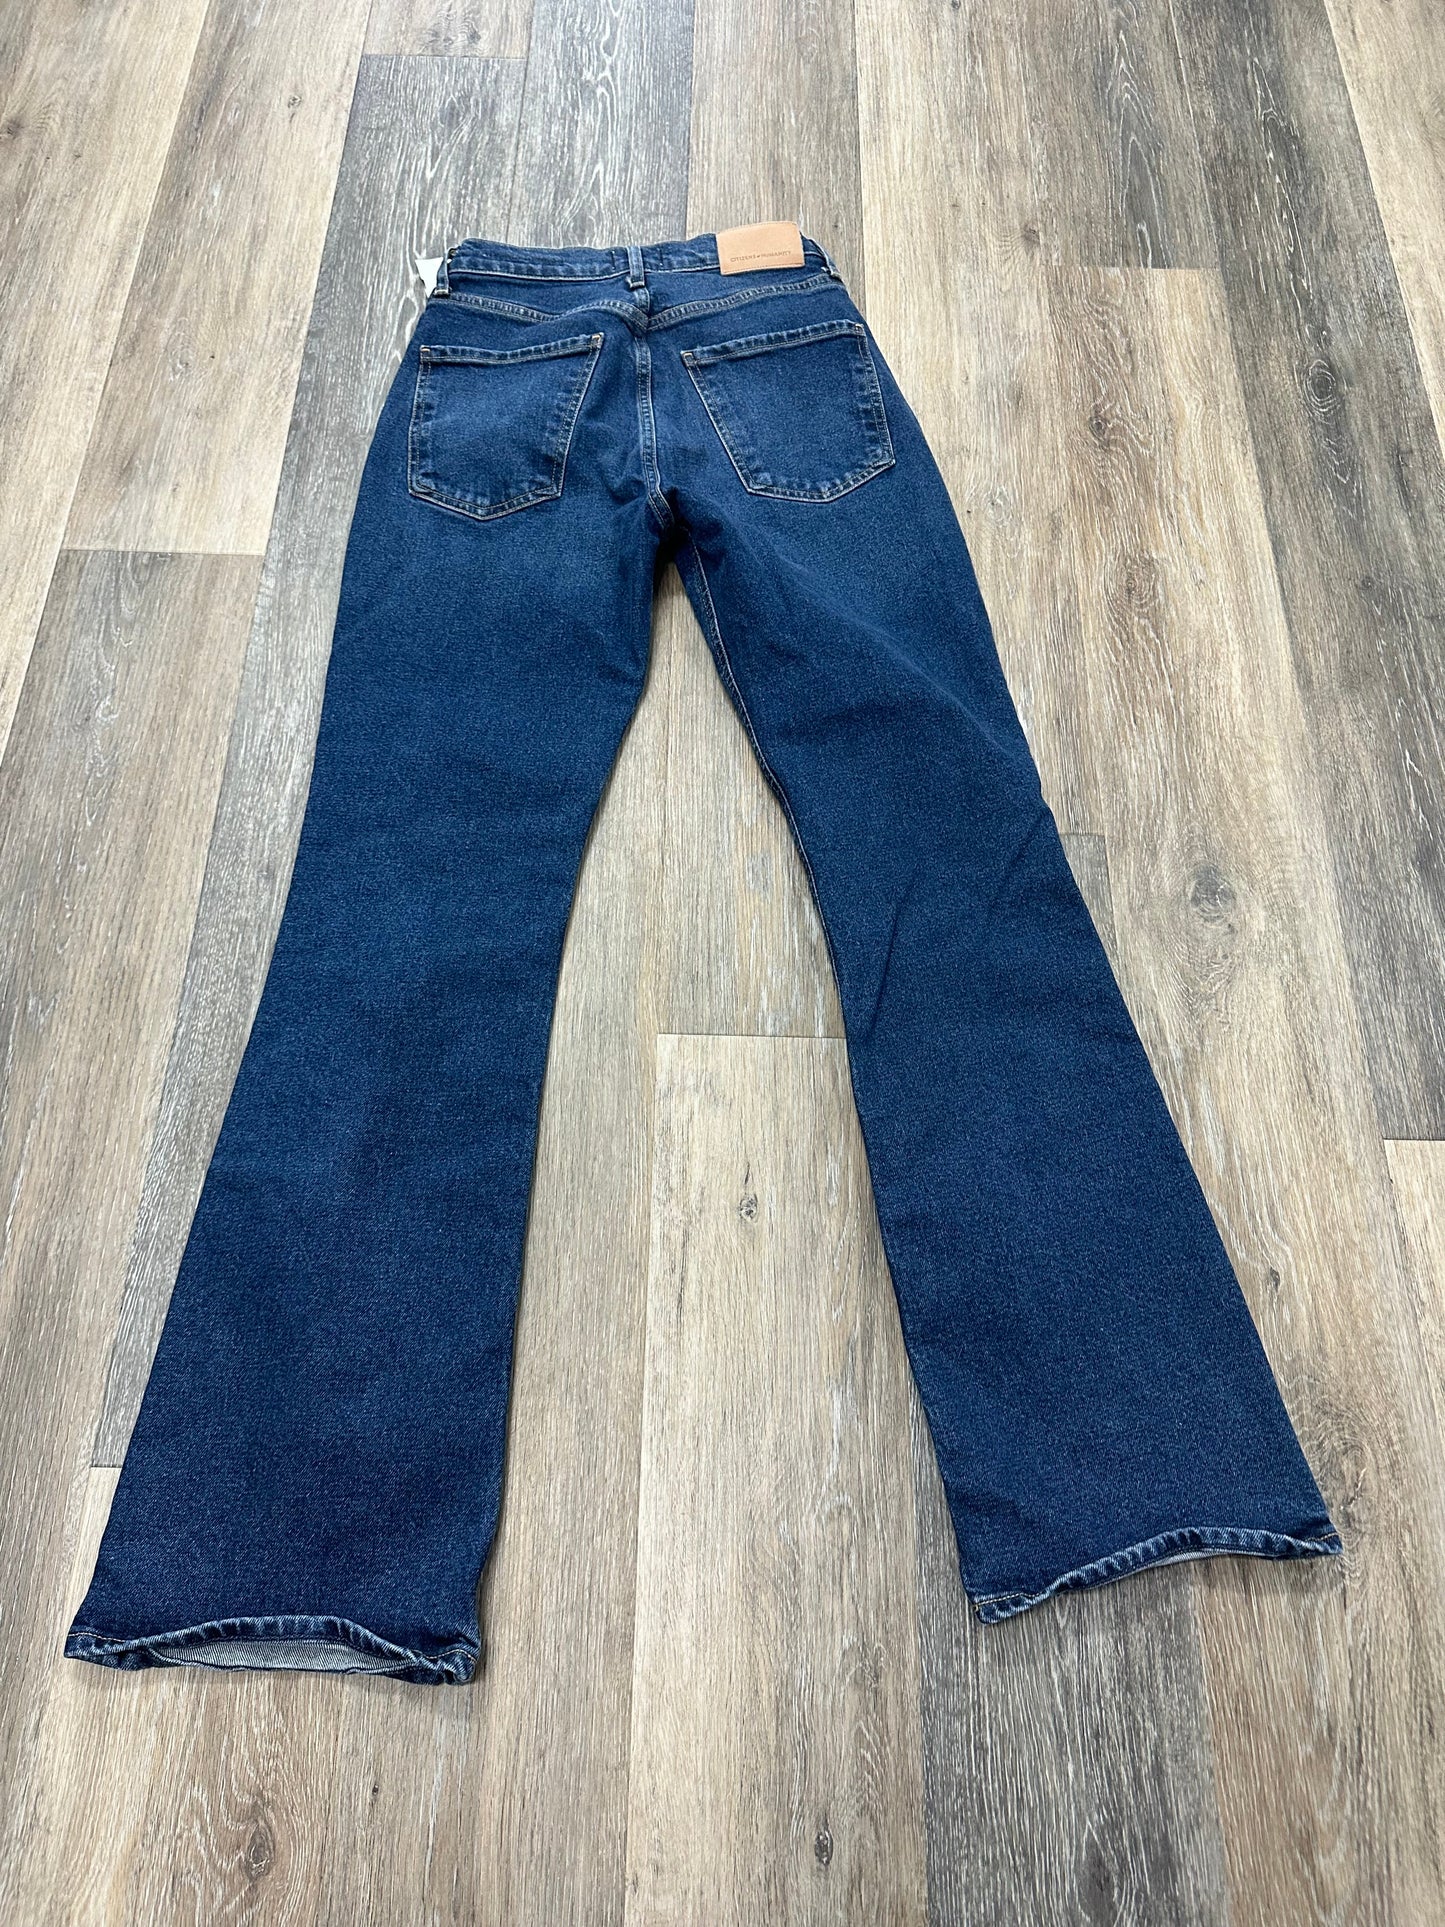 Jeans Designer By Citizens Of Humanity  Size: 2